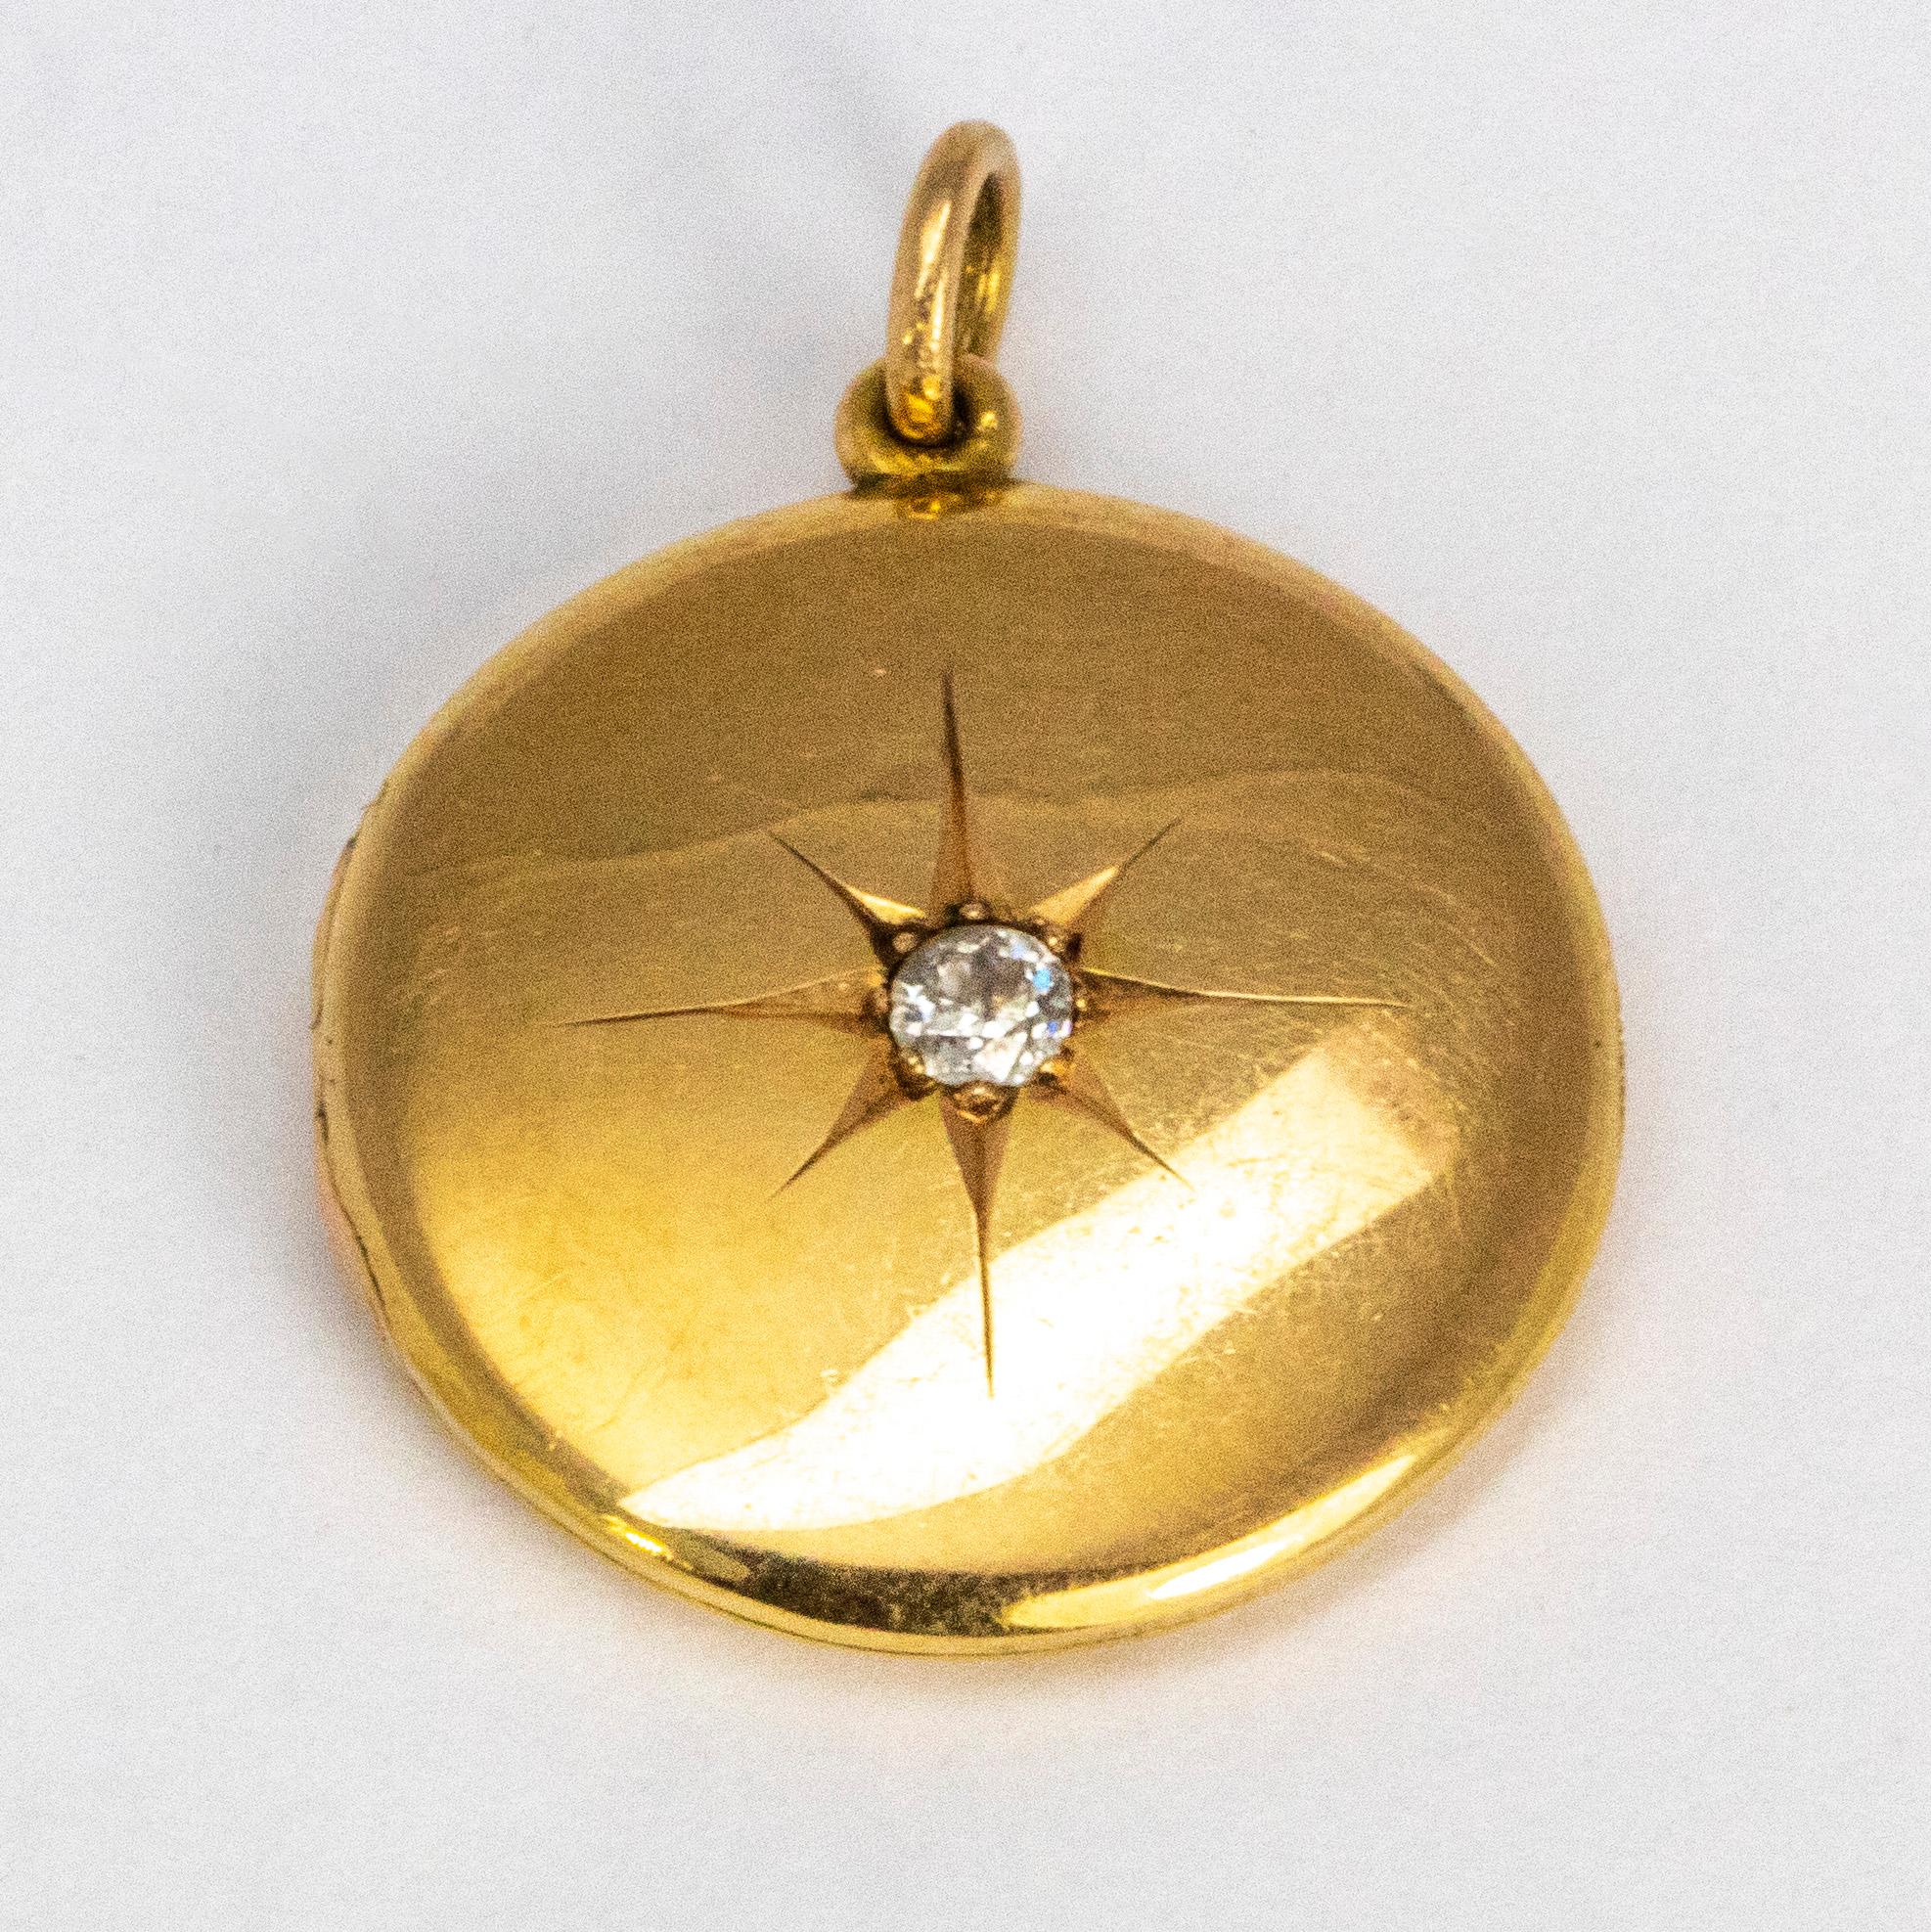 The diamond set in a gorgeous star setting at the centre of the locket measures 15pts and adds a wonderful sparkle to the simple glossy gold locket.

Diameter: 22mm 